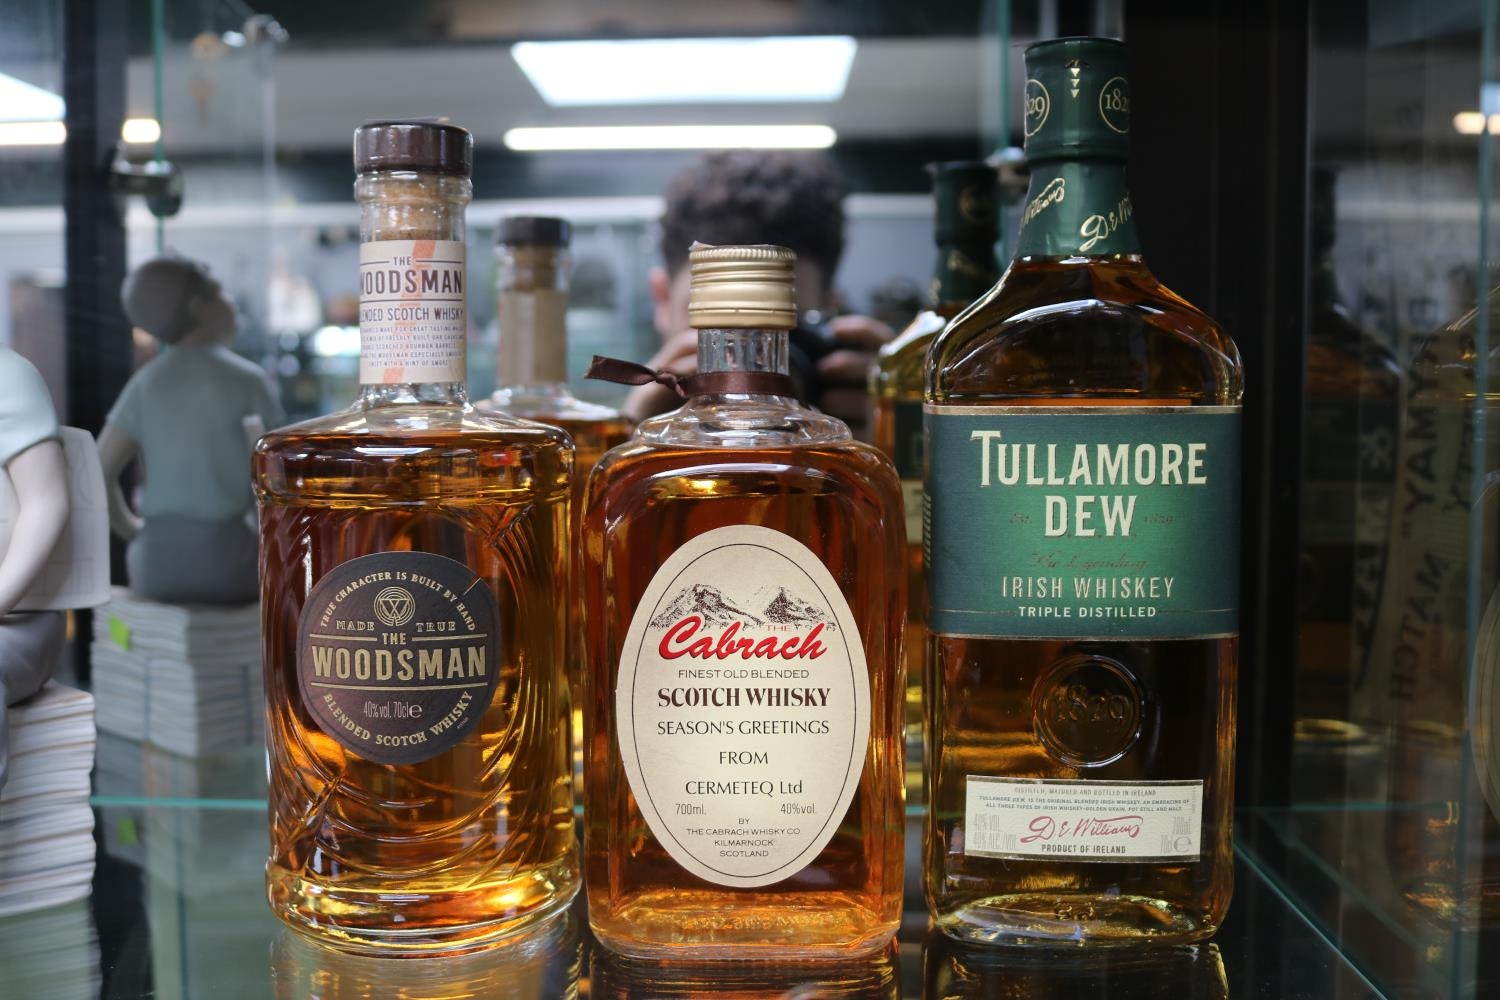 3 Whiskies to include The Woodsman blended Scotch Whisky 70cl, Cabrach 700ml & Tullamore Dew Irish